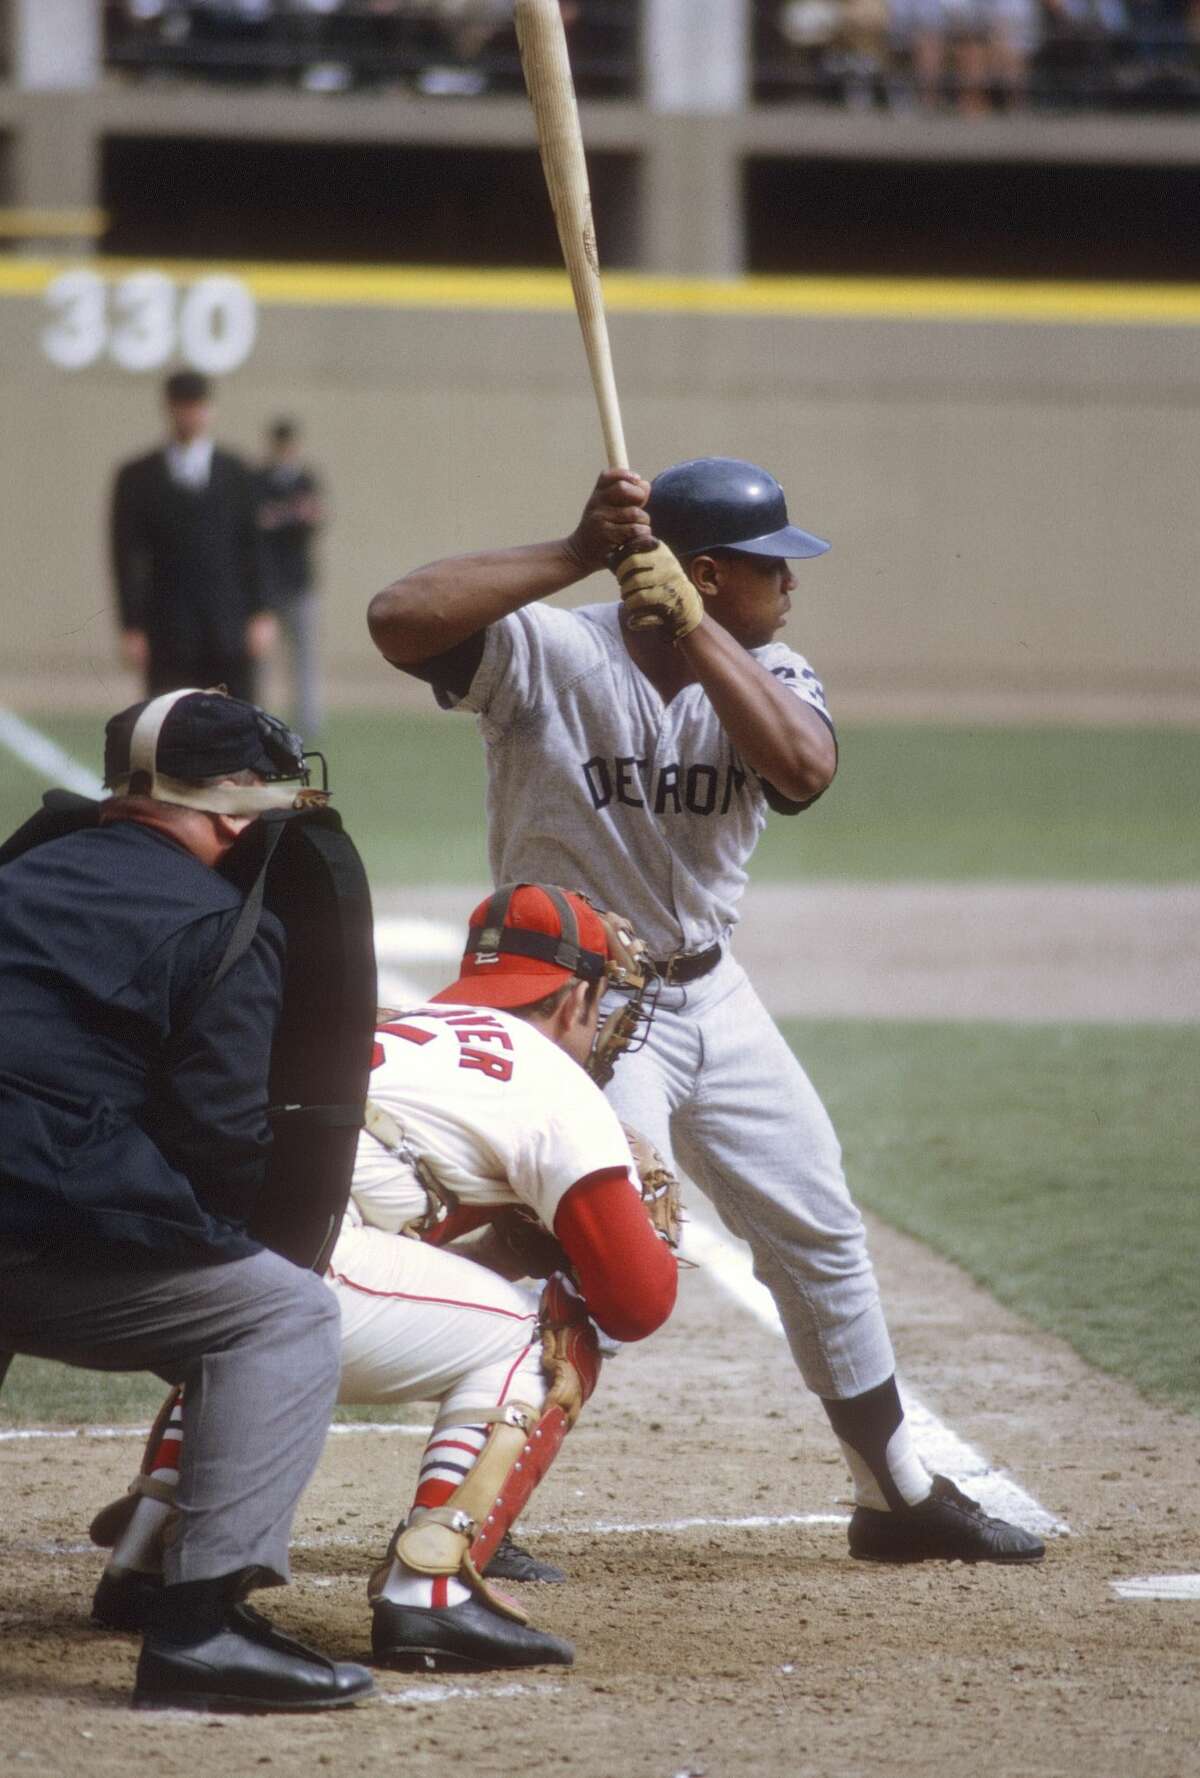 Detroit Tigers' Willie Horton bats during Game 7 of the 1968 World Series.